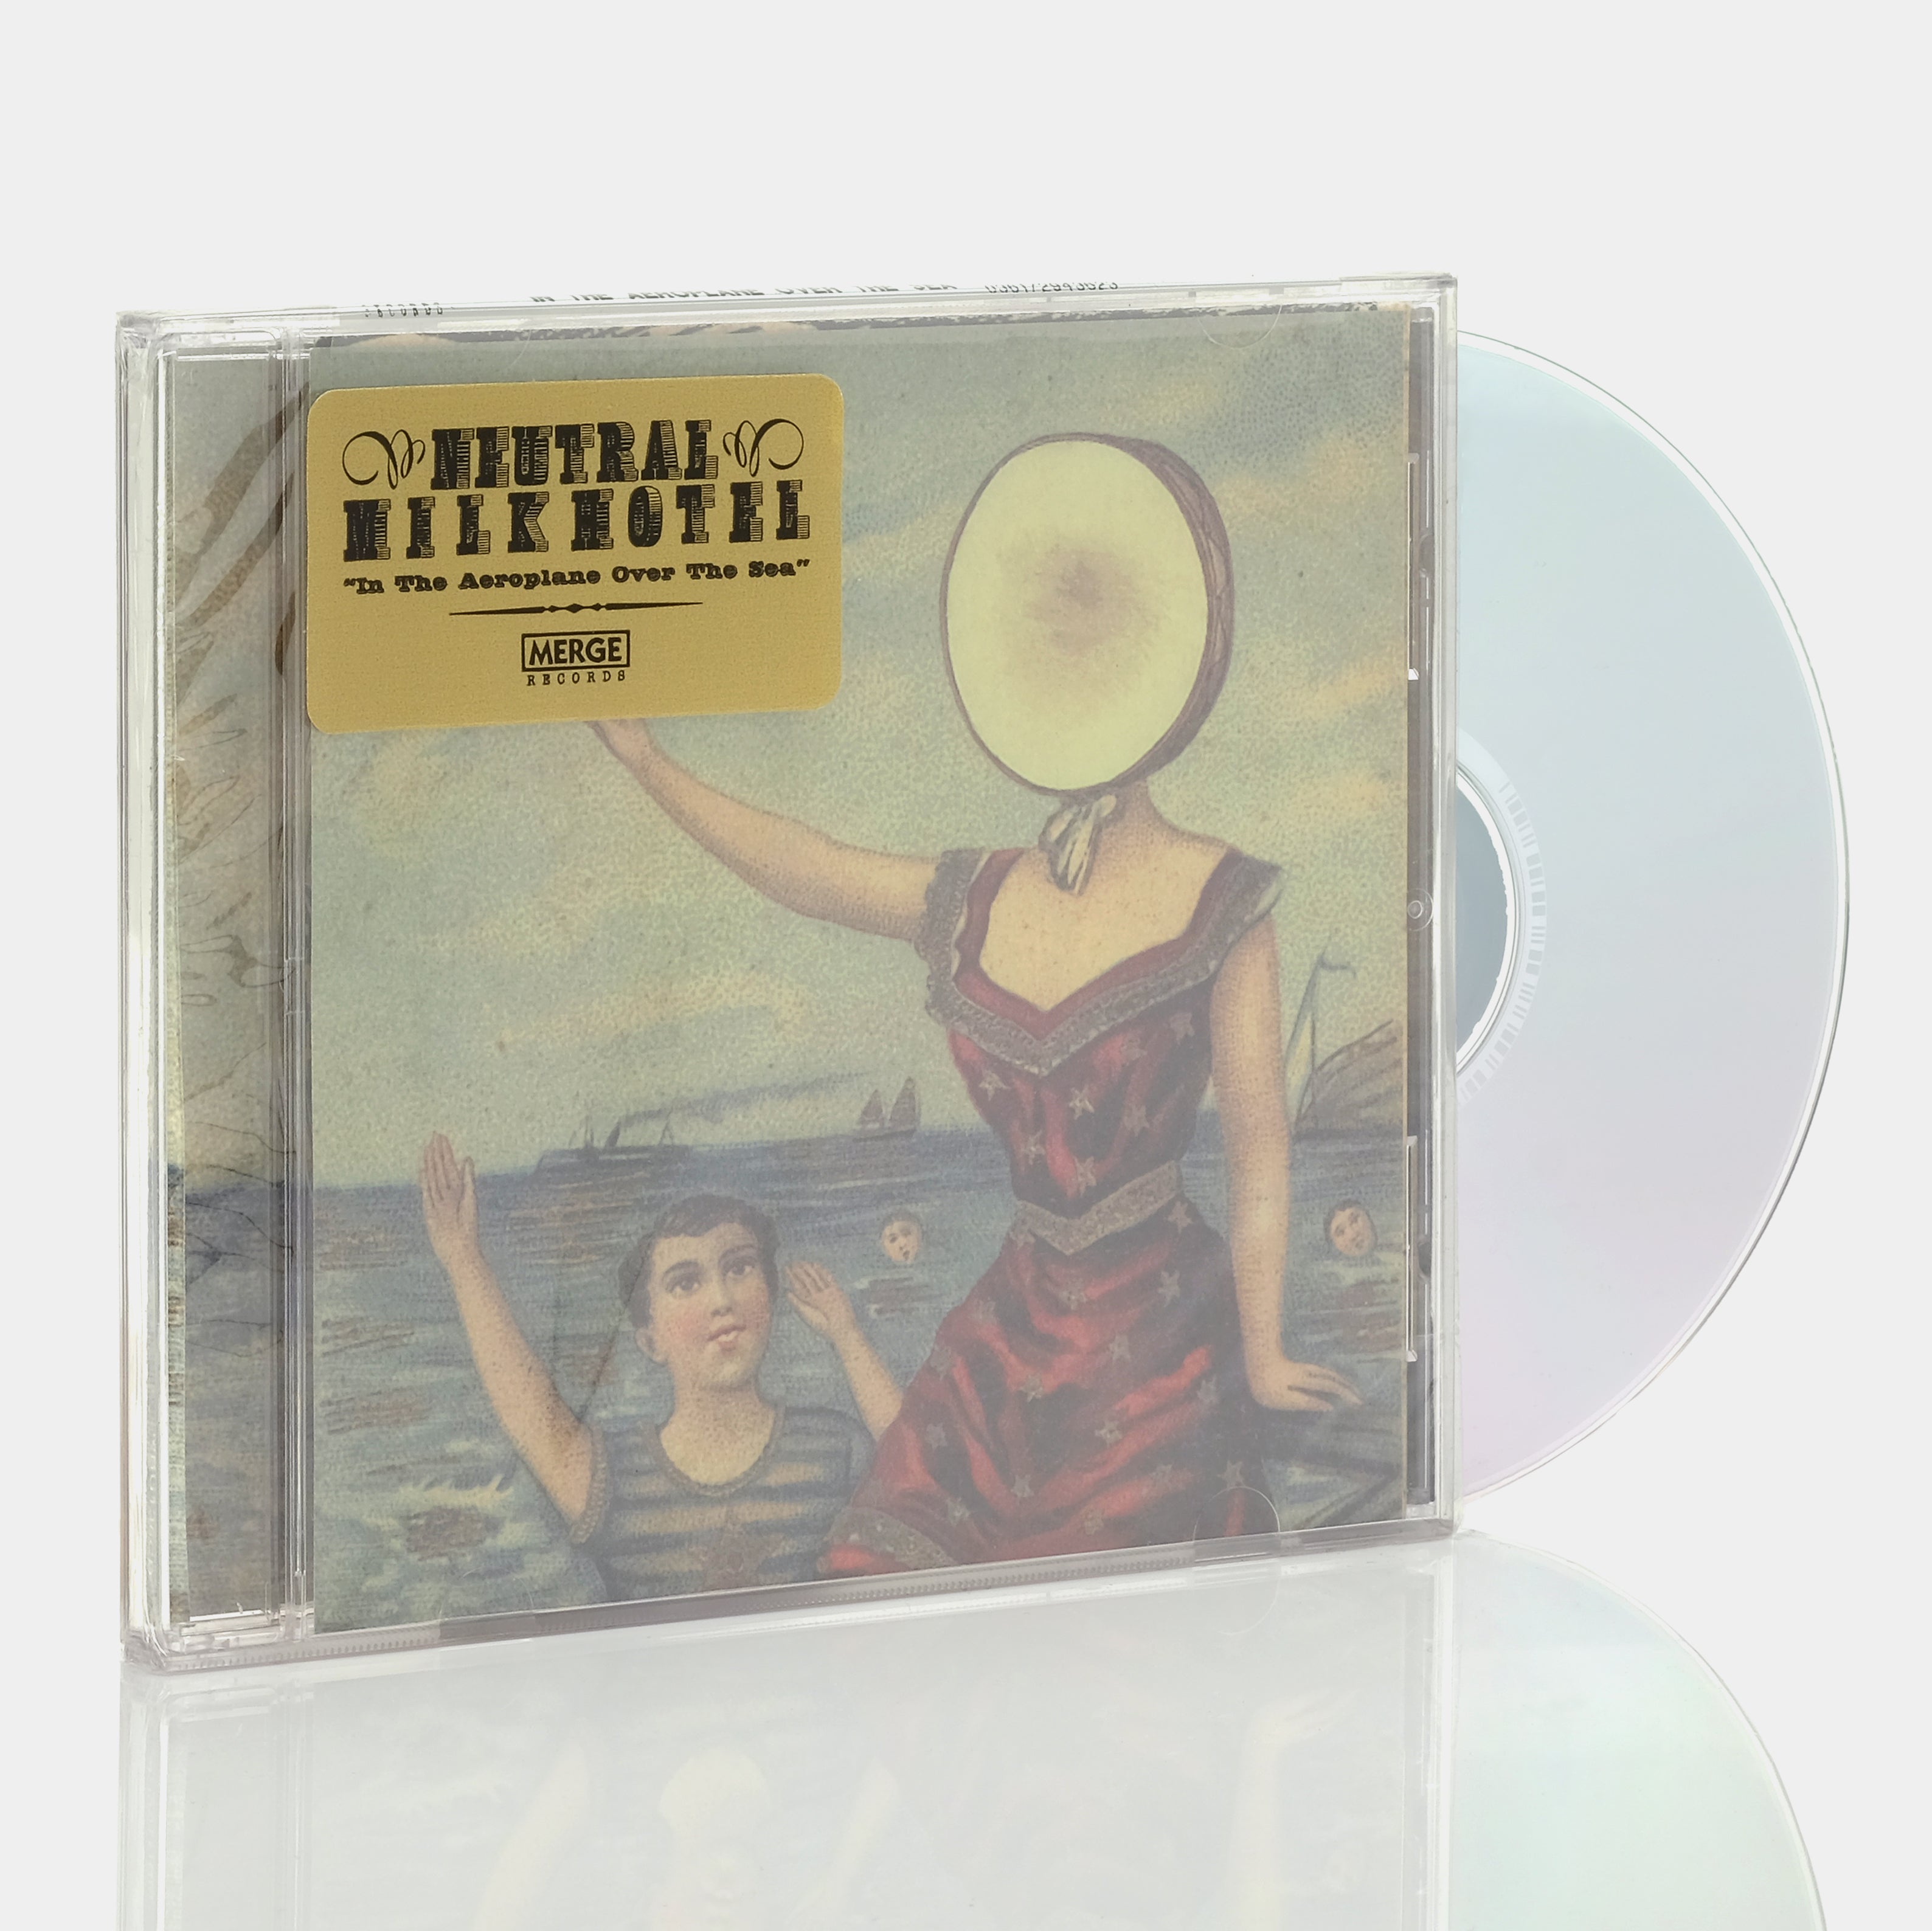 Neutral Milk Hotel - In The Aeroplane Over The Sea CD